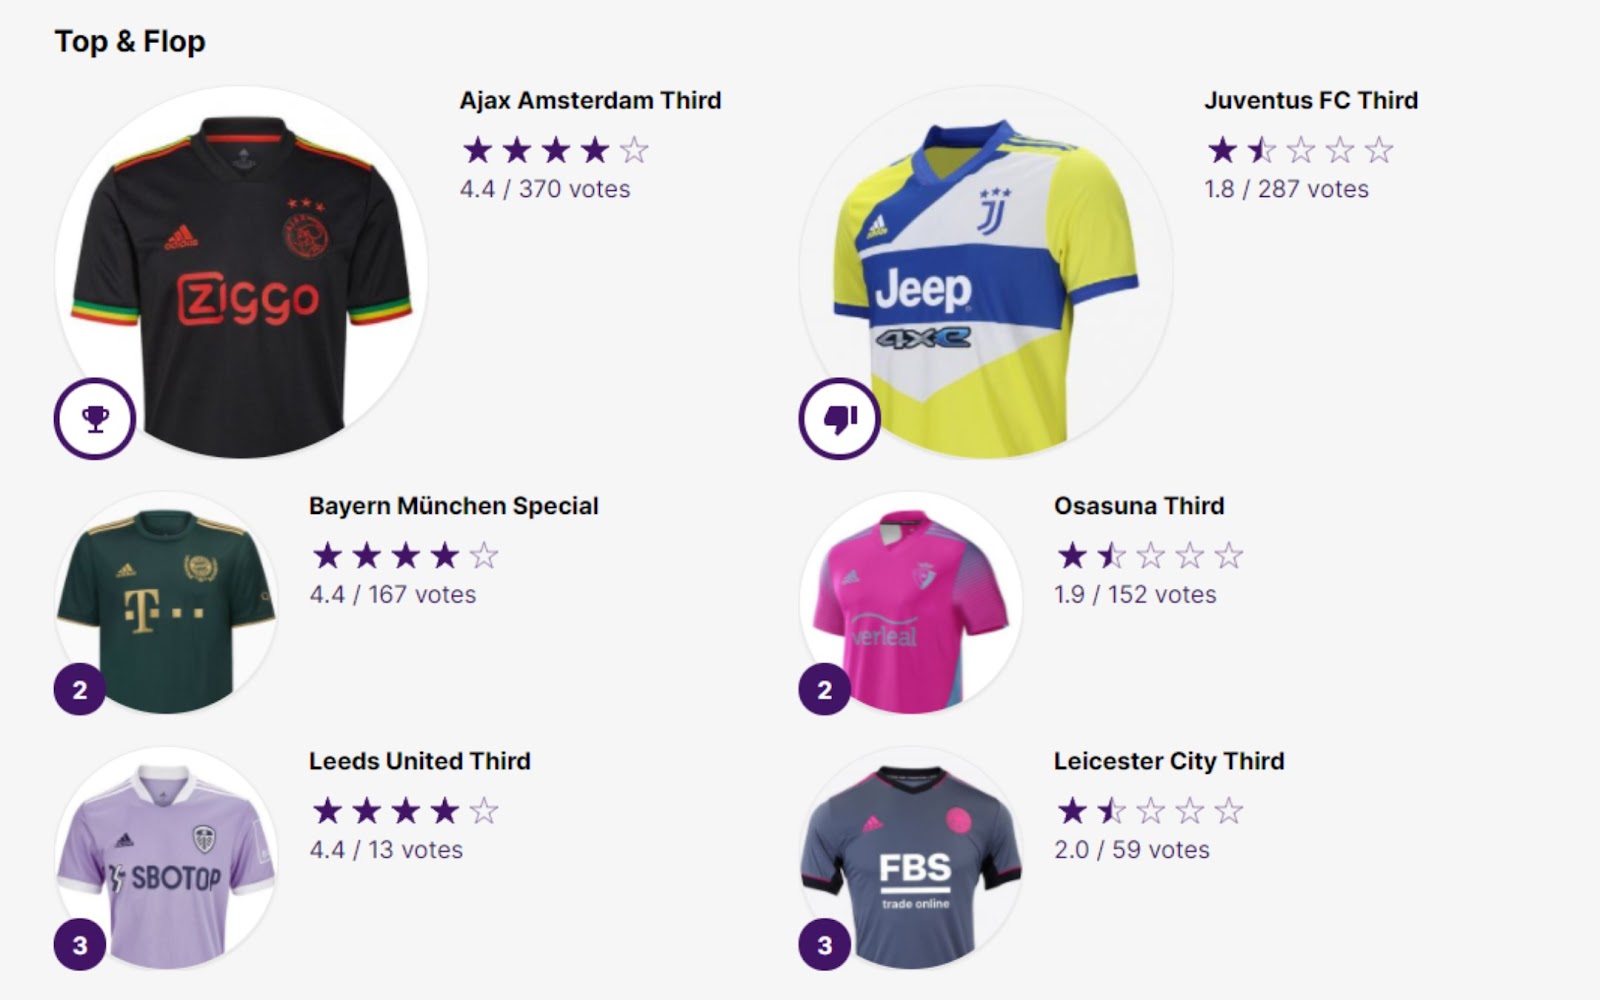 The best and worst 2021/22 kits confirmed or 'leaked' so far